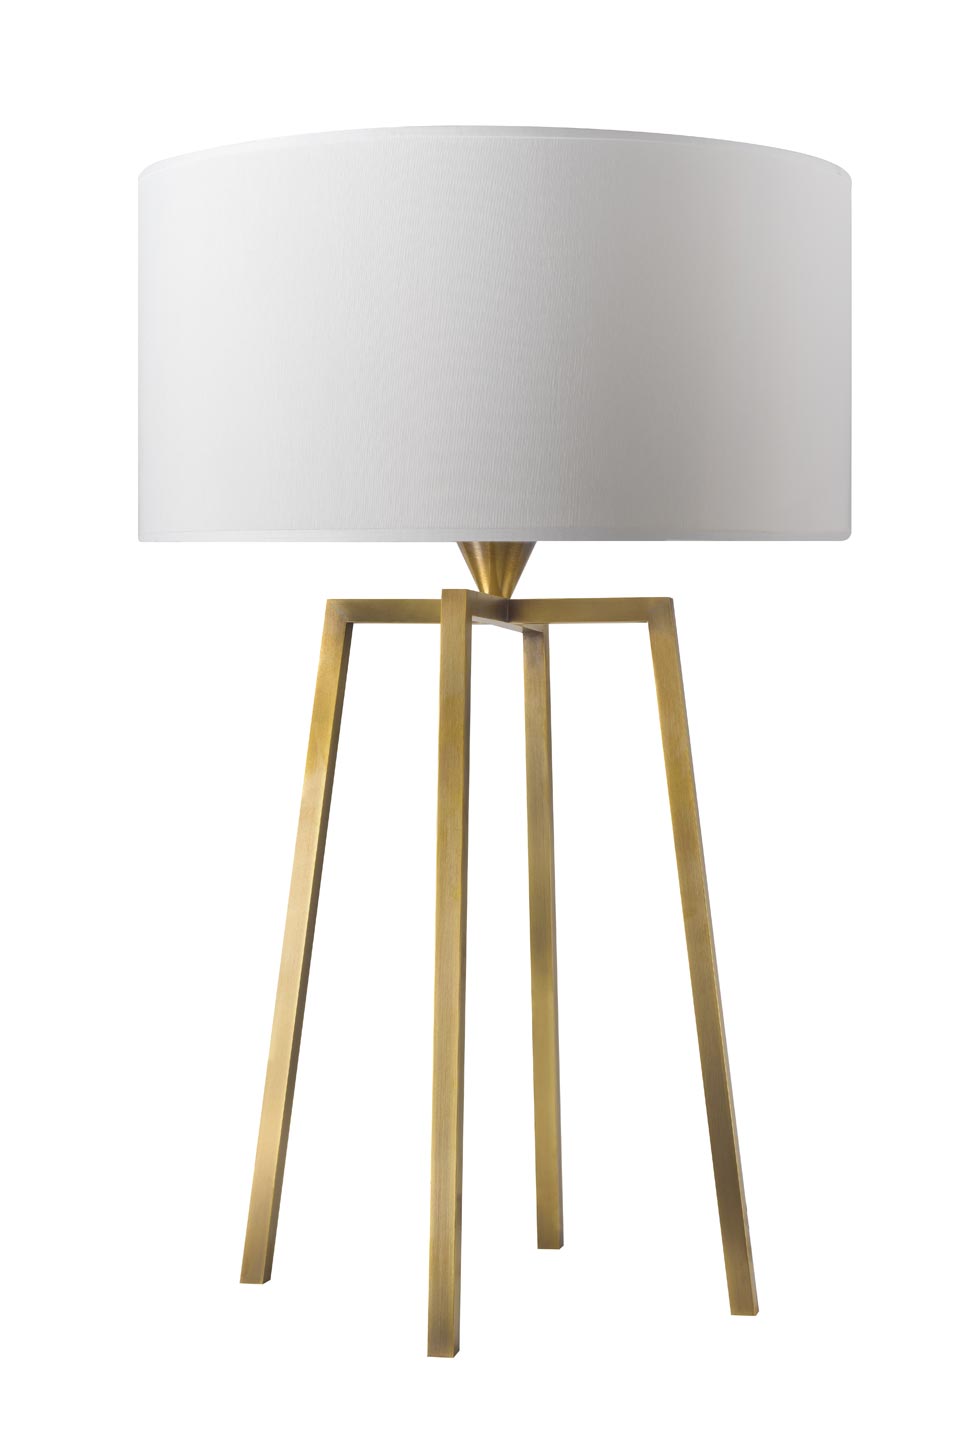 Four Legged Brass Table Lamp L162, Contemporary Brass Table Lamps